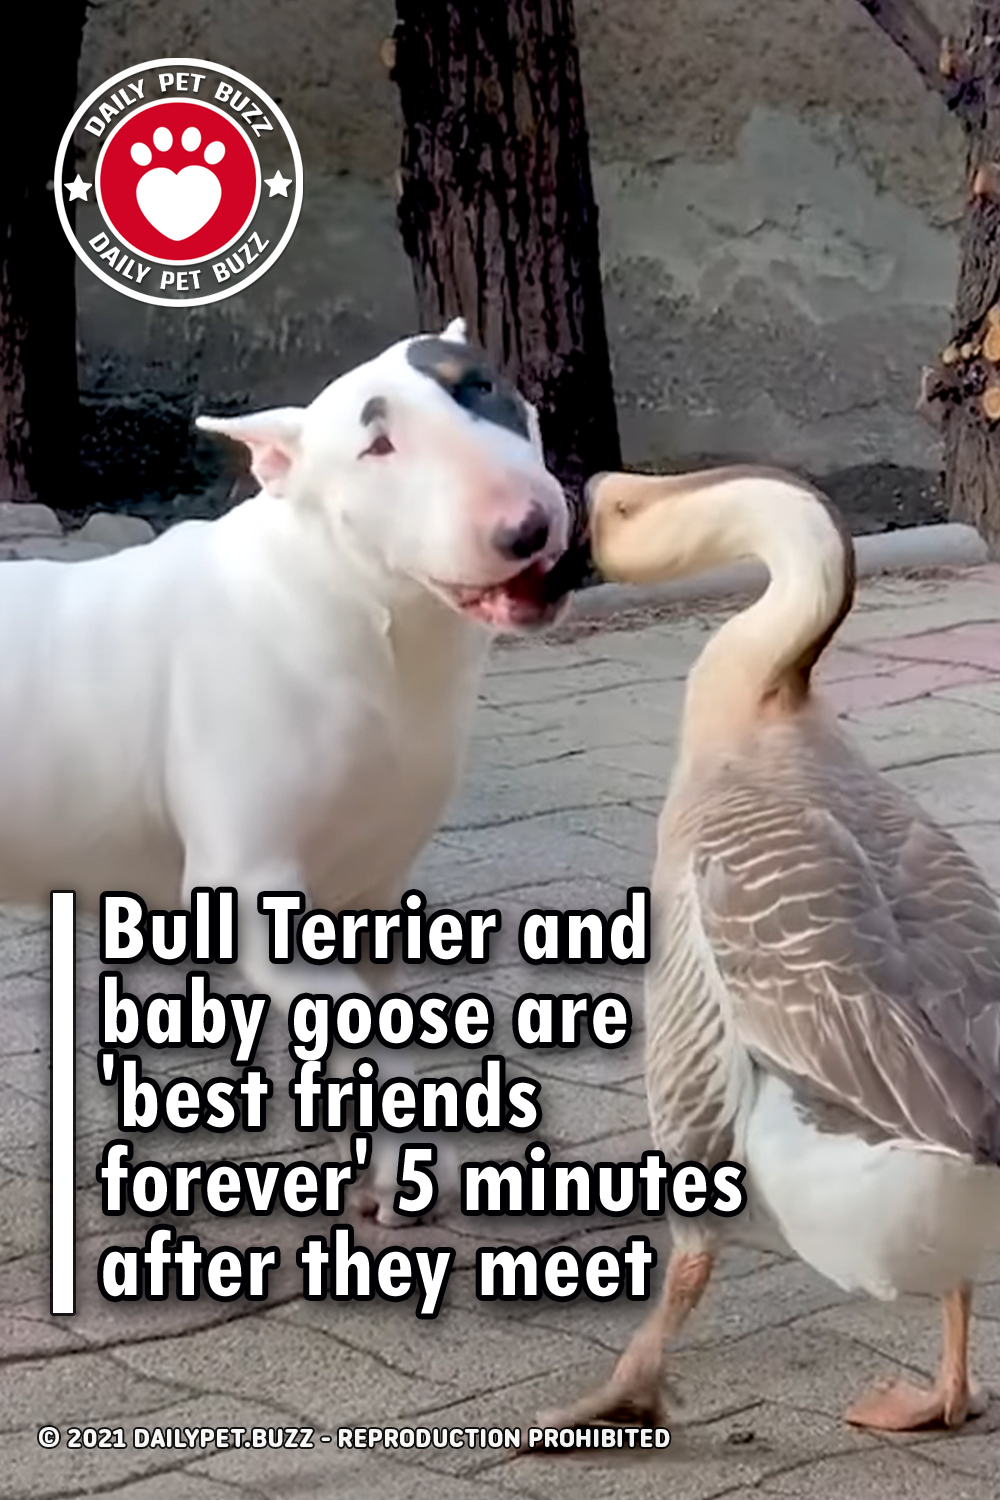 Bull Terrier and baby goose are \'best friends forever\' 5 minutes after they meet